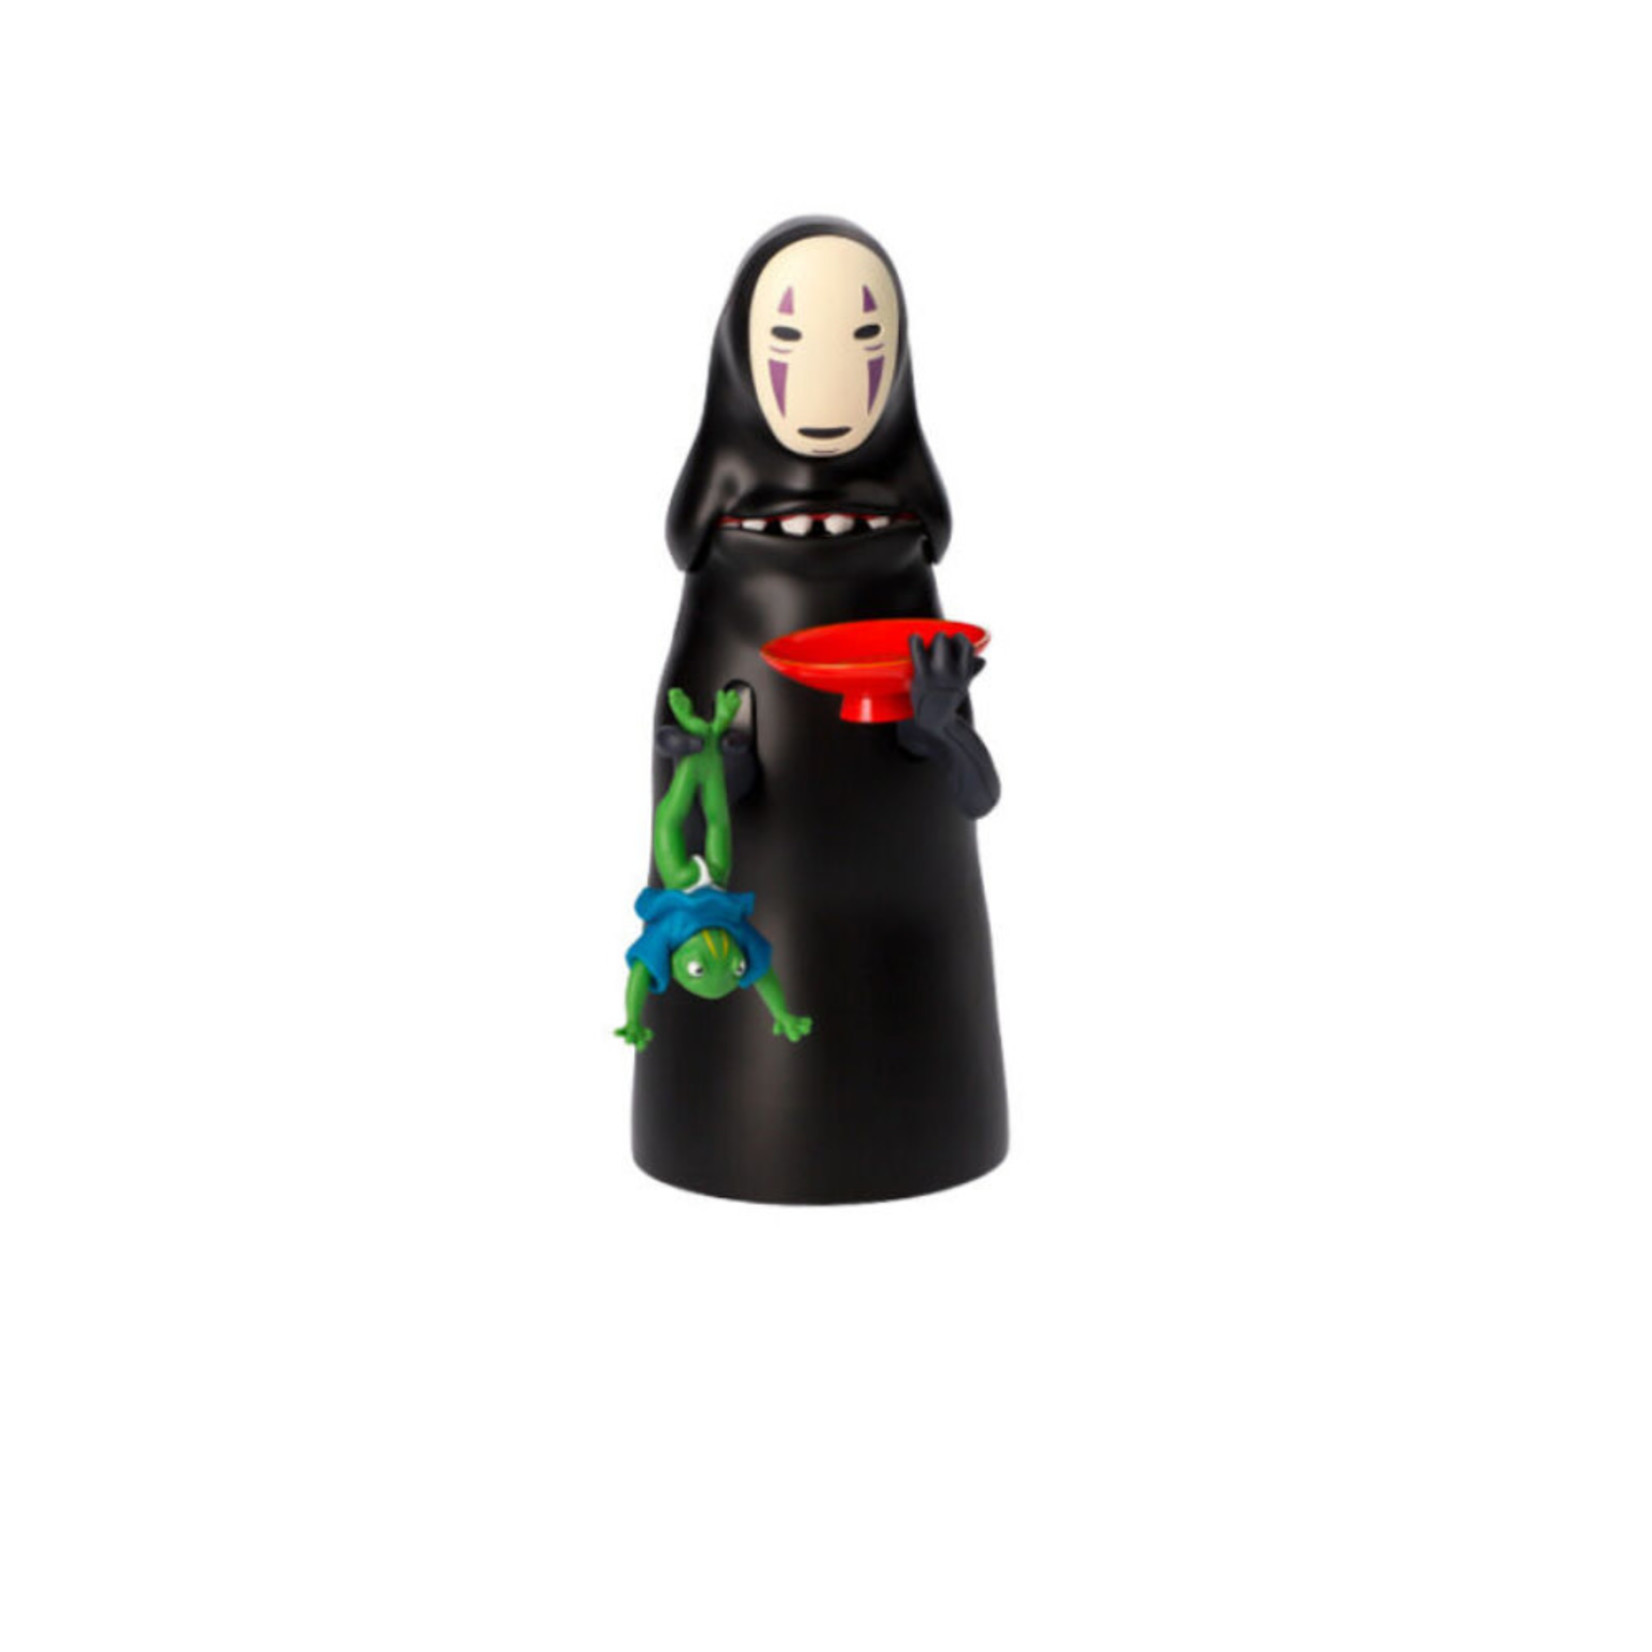 Benelic SPIRITED AWAY MORE NO FACE COIN BANK WITH FIGURES